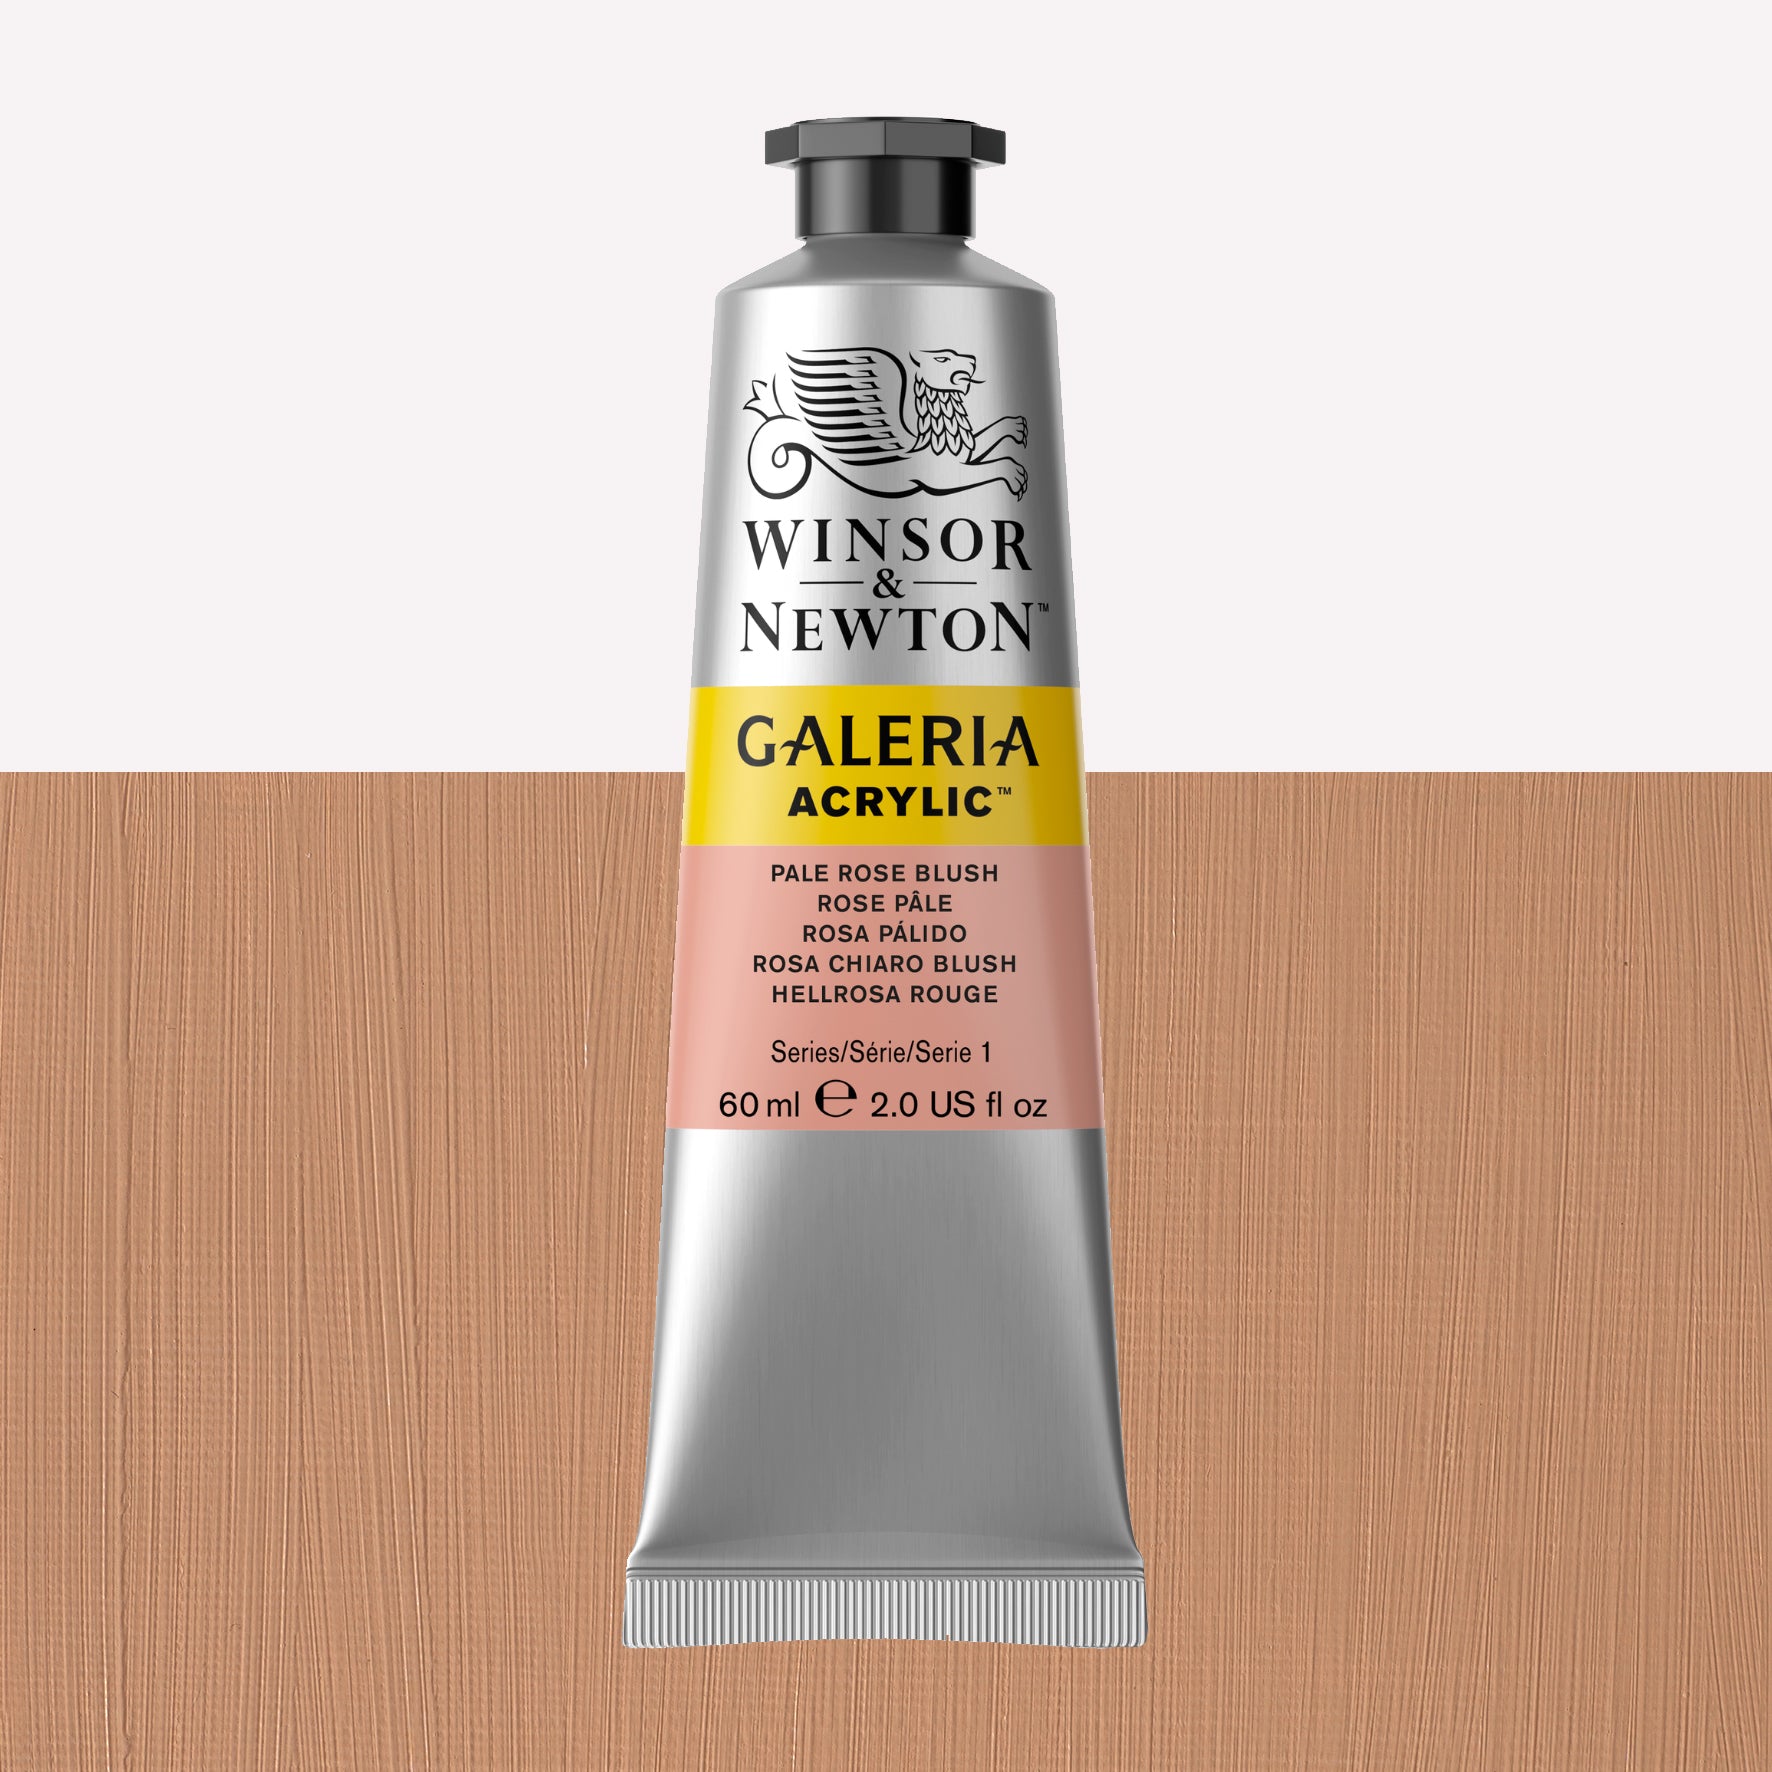 A 60ml tube of vibrant Galeria Acrylic paint in the shade Pale Rose Blush . This paint, made by Winsor and Newton, is packaged in a silver tube with a black lid. 